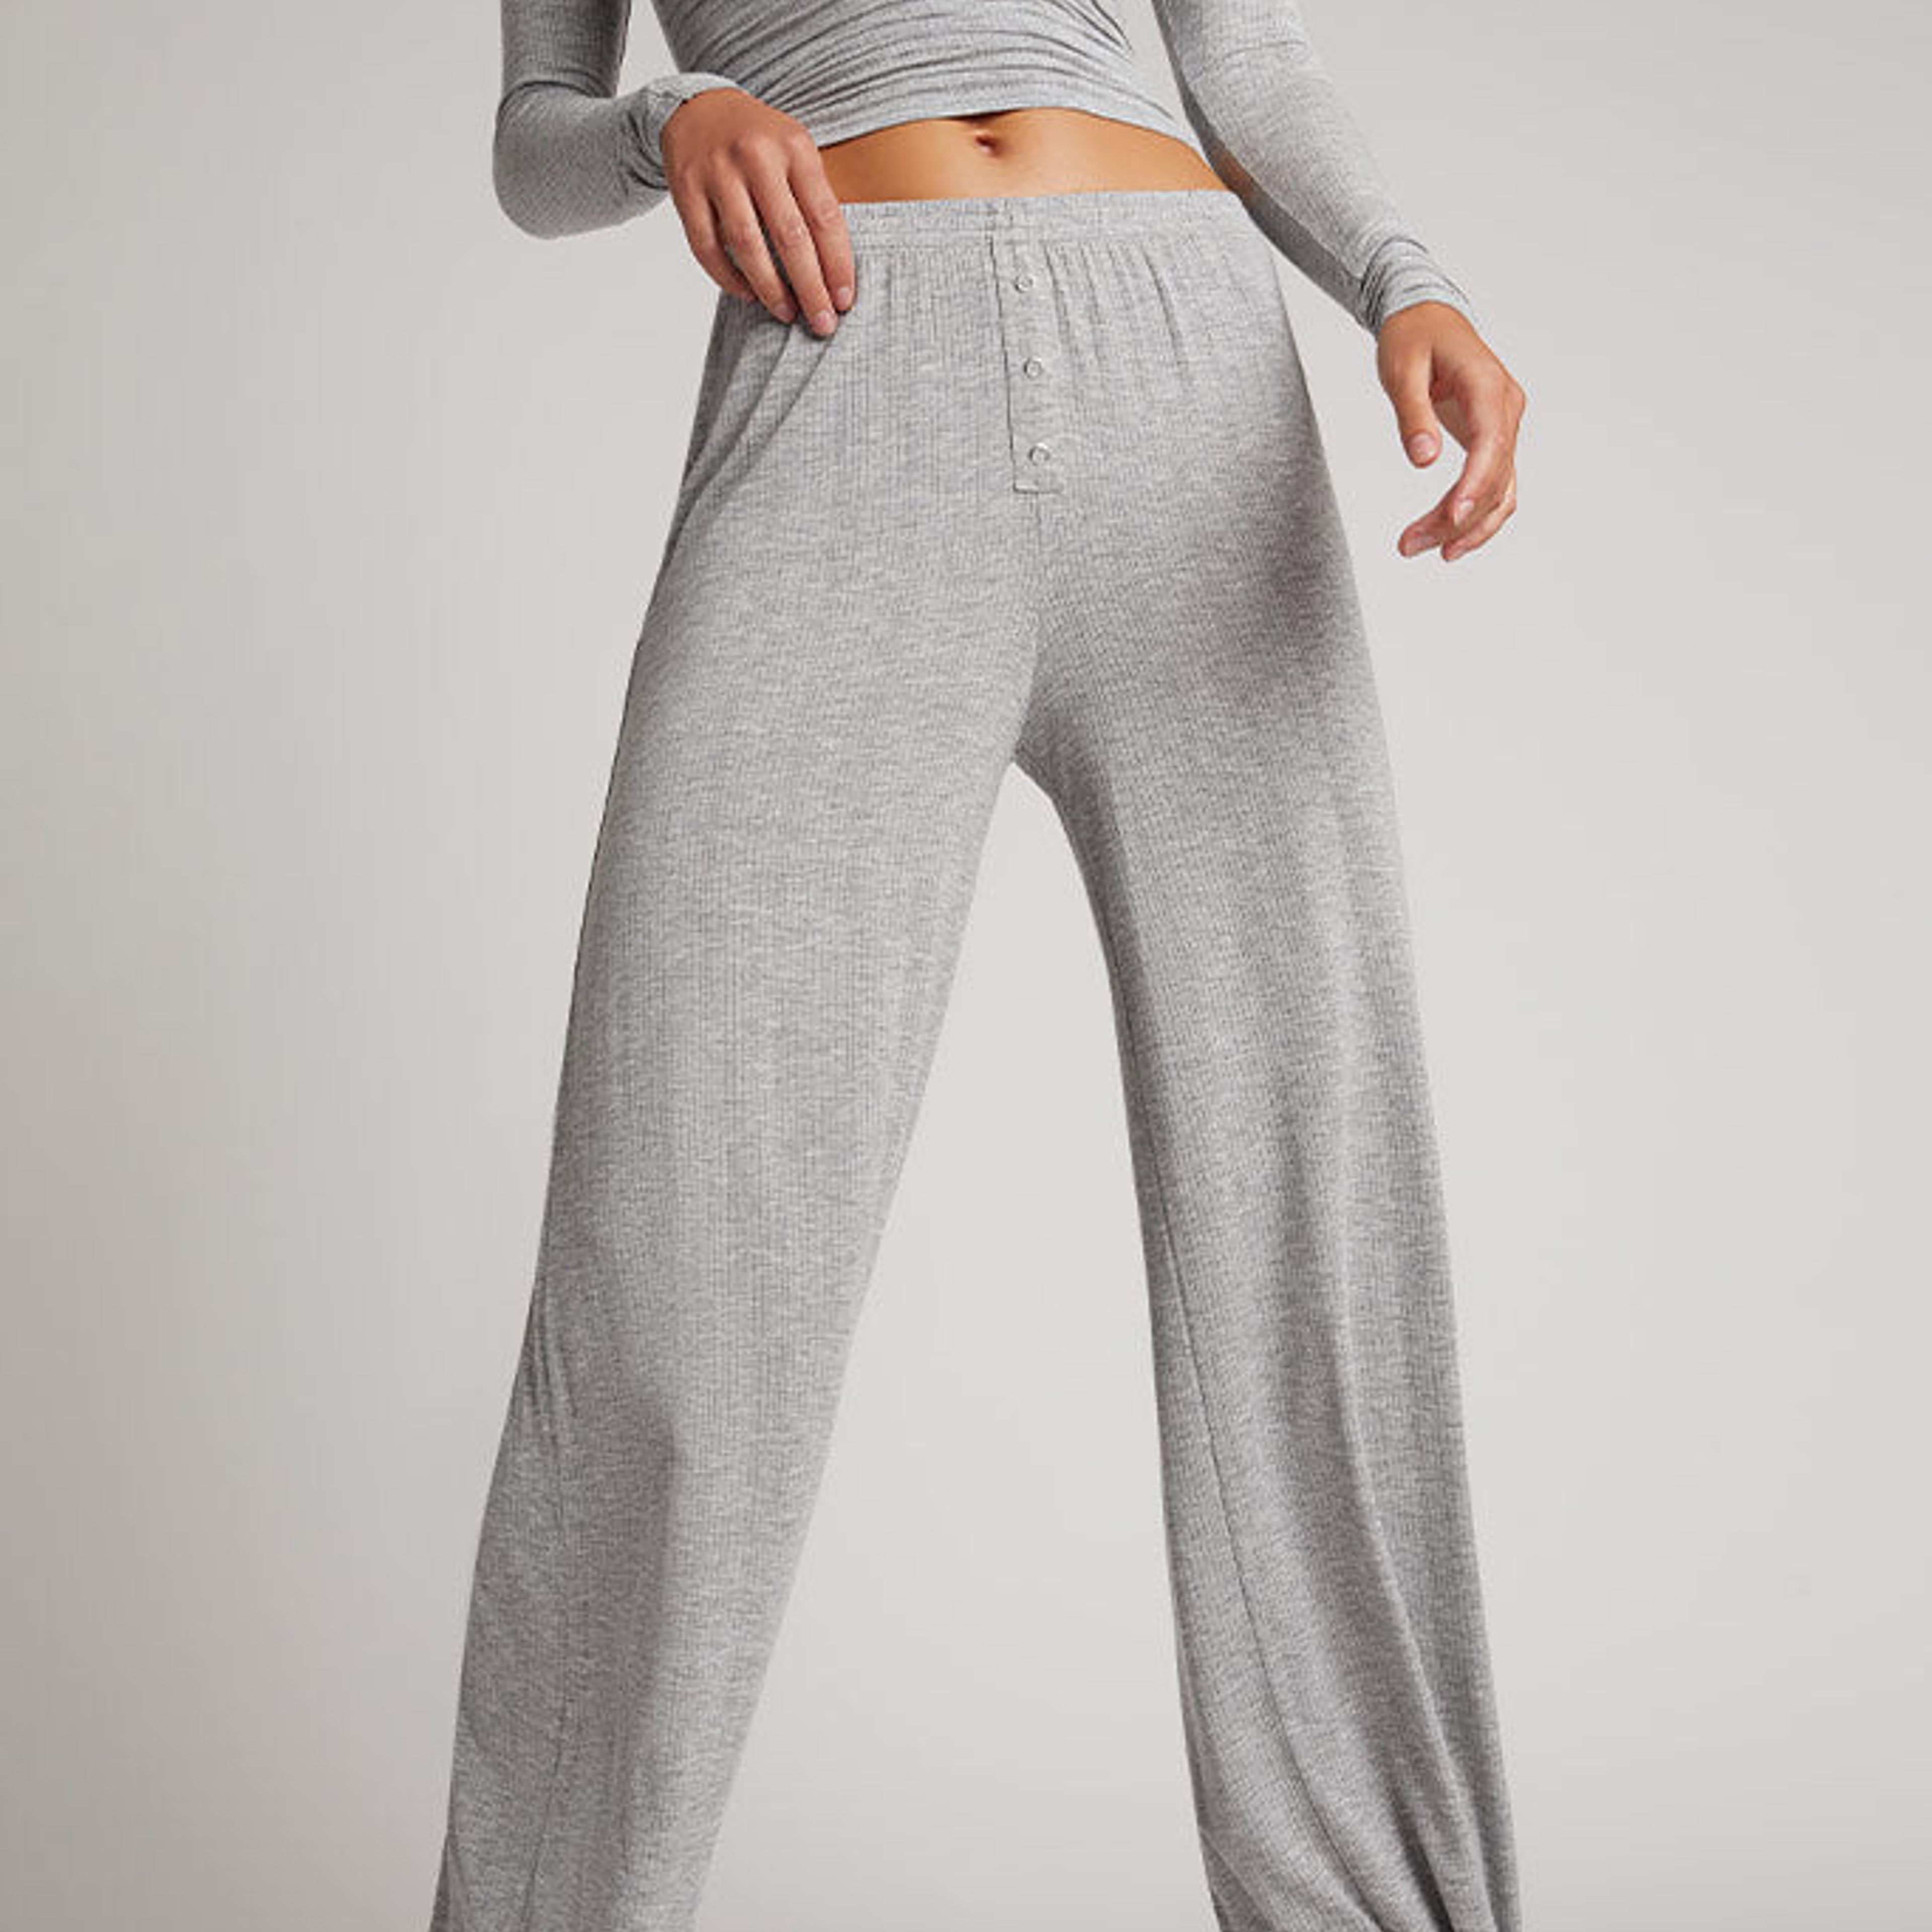 Whipped Track Pant in Heather Grey